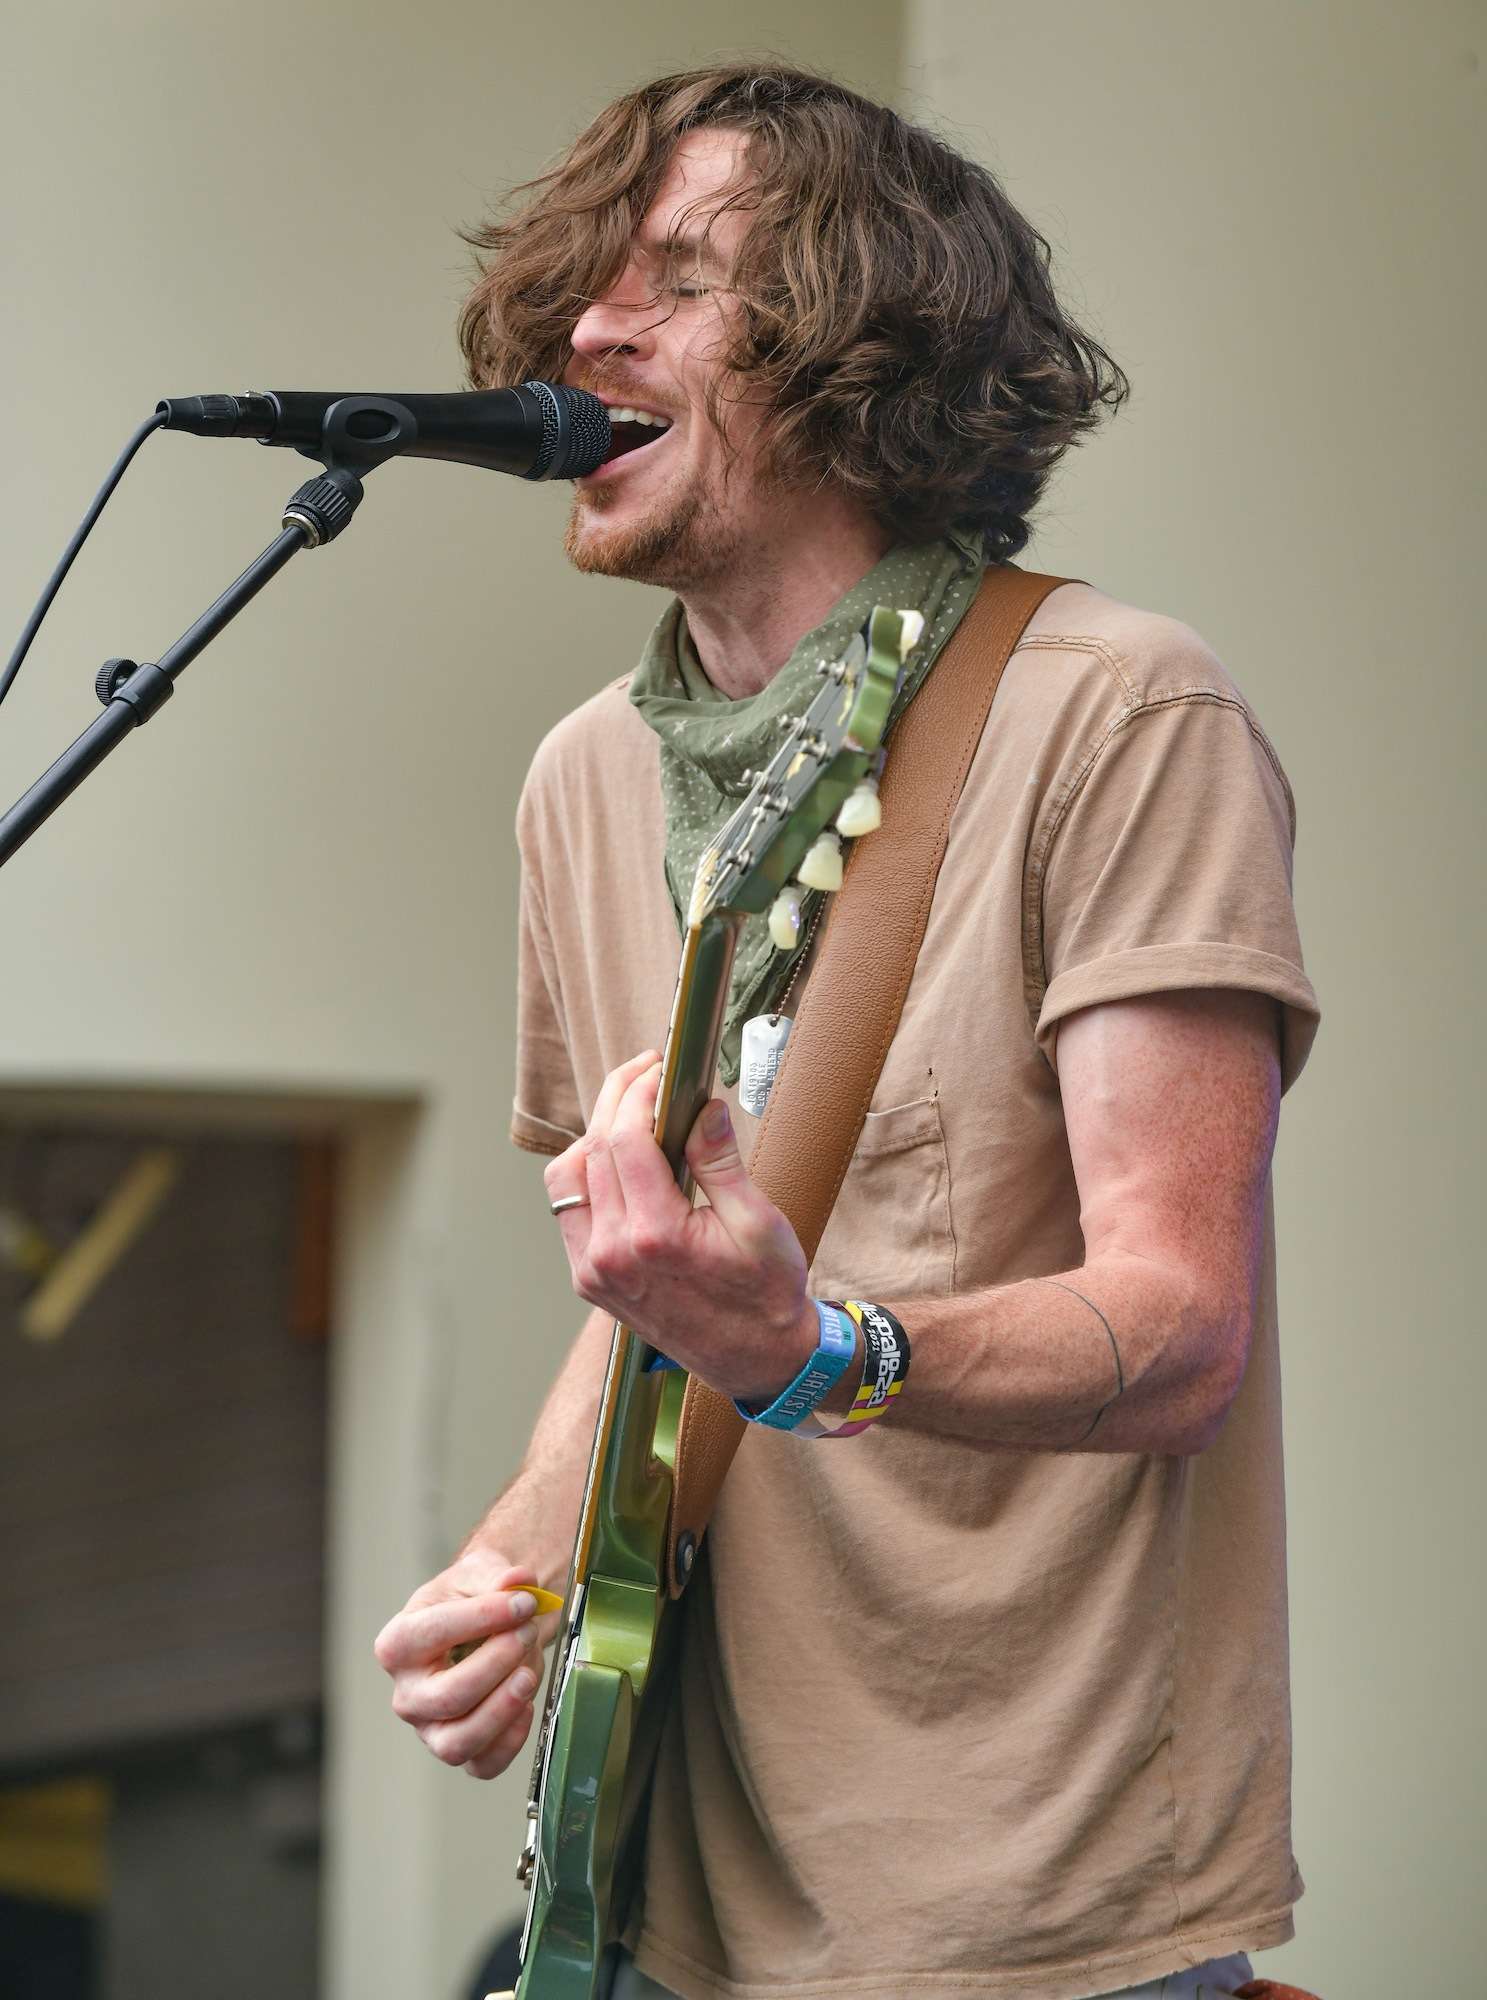 Black Pistol Fire Live at Lollapalooza [GALLERY] 4